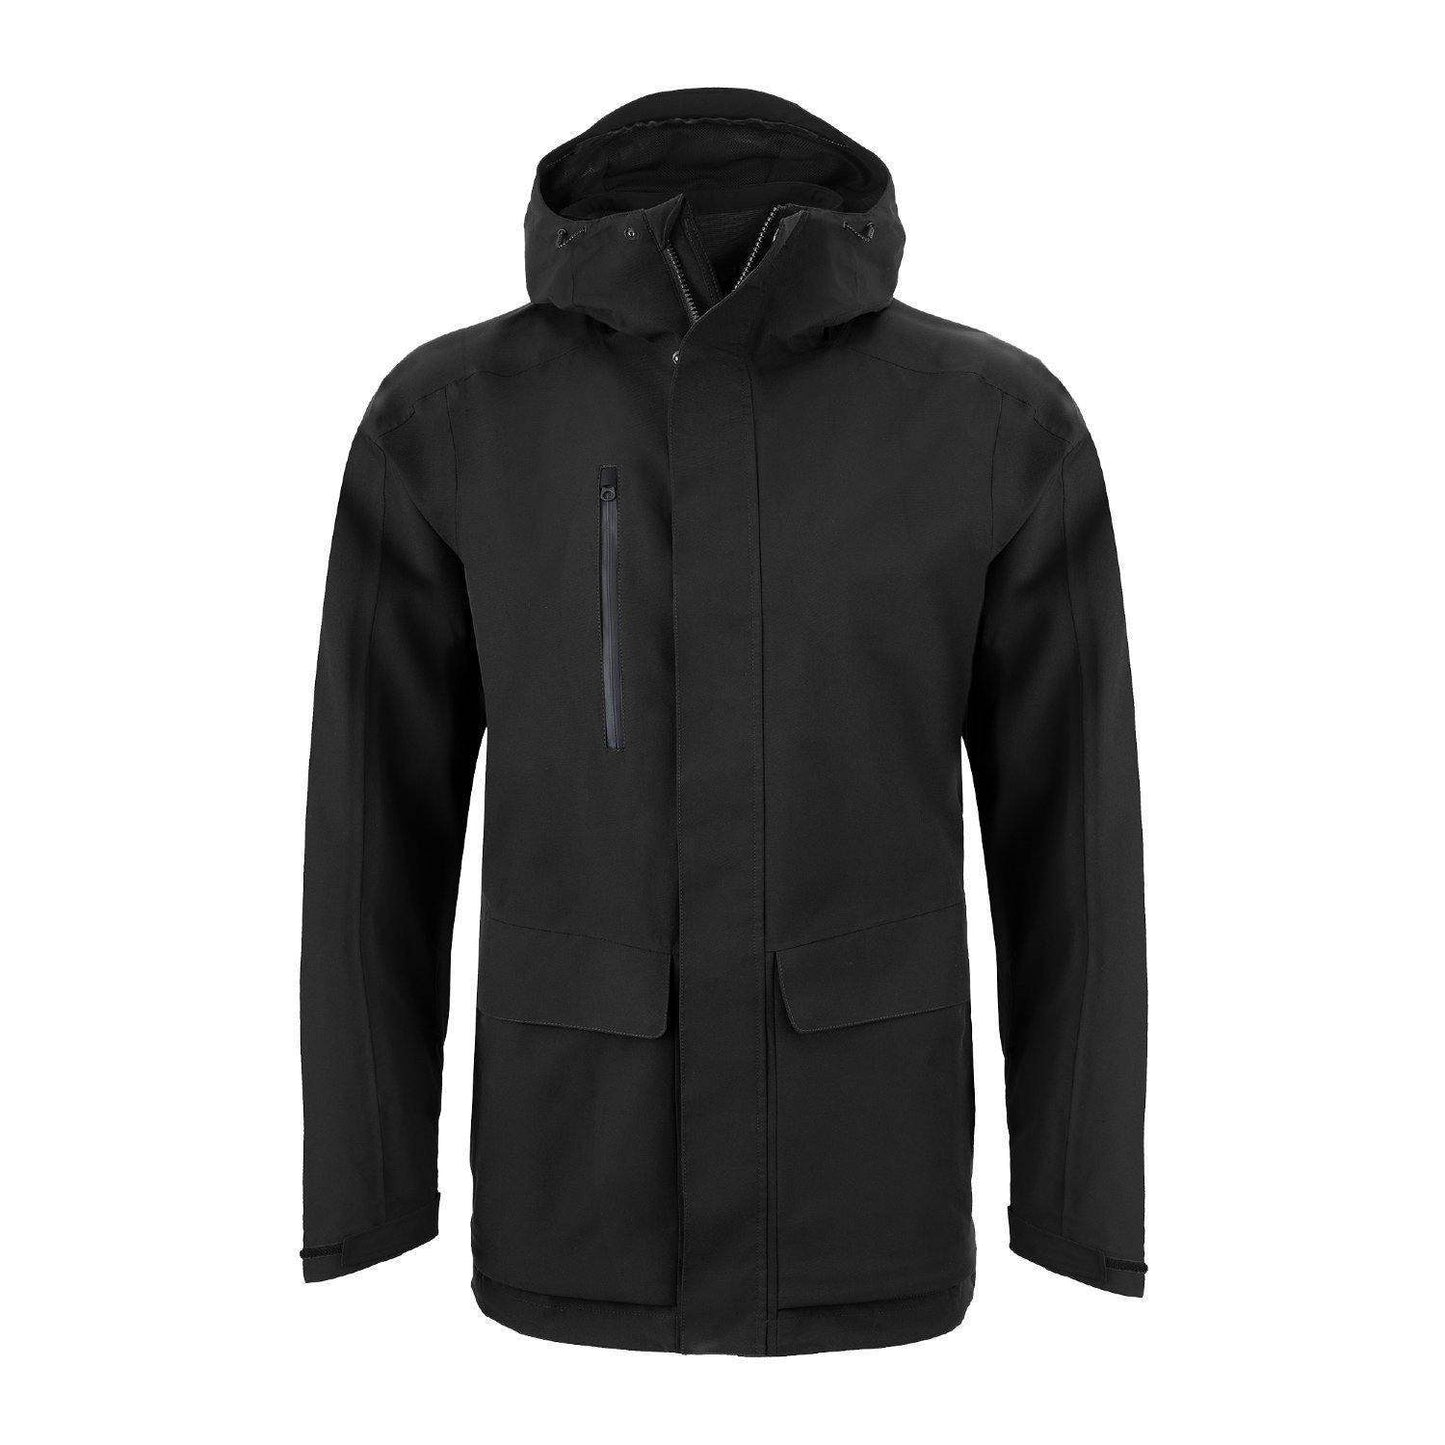 Unisex Expert Kiwi Pro Stretch 3In1 Jacket by Craghoppers - The Luxury Promotional Gifts Company Limited